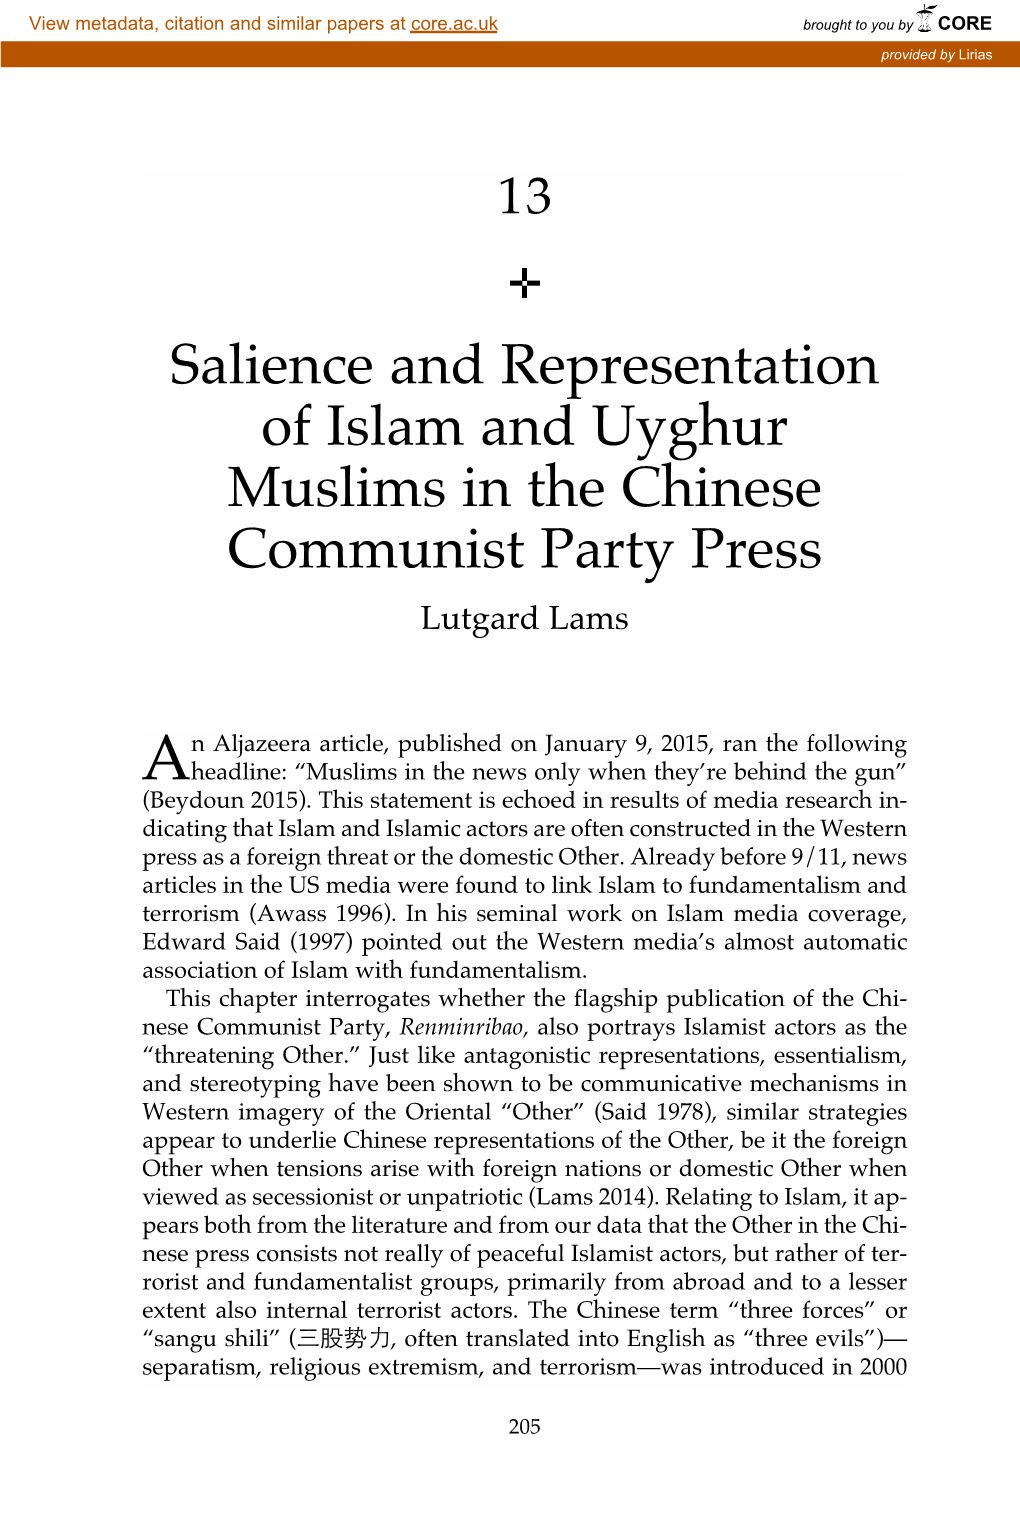 Salience and Representation of Islam and Uyghur Muslims in the Chinese Communist Party Press Lutgard Lams